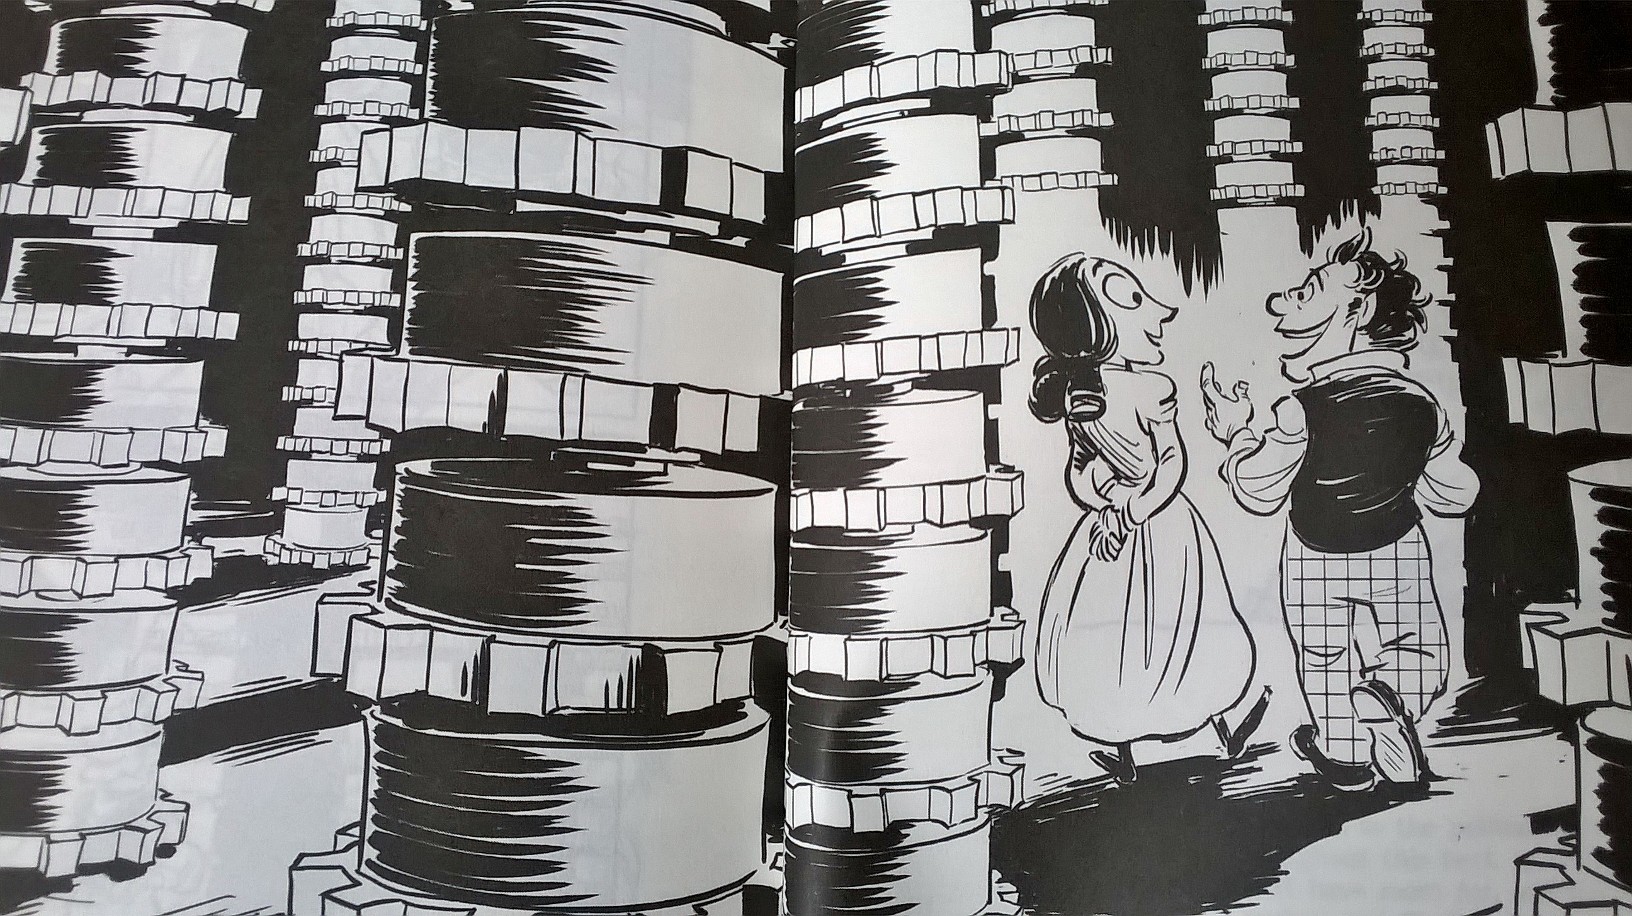 The Thrilling Adventure of Lovelace and Babbage: The (Mostly) True Story of the First Computer